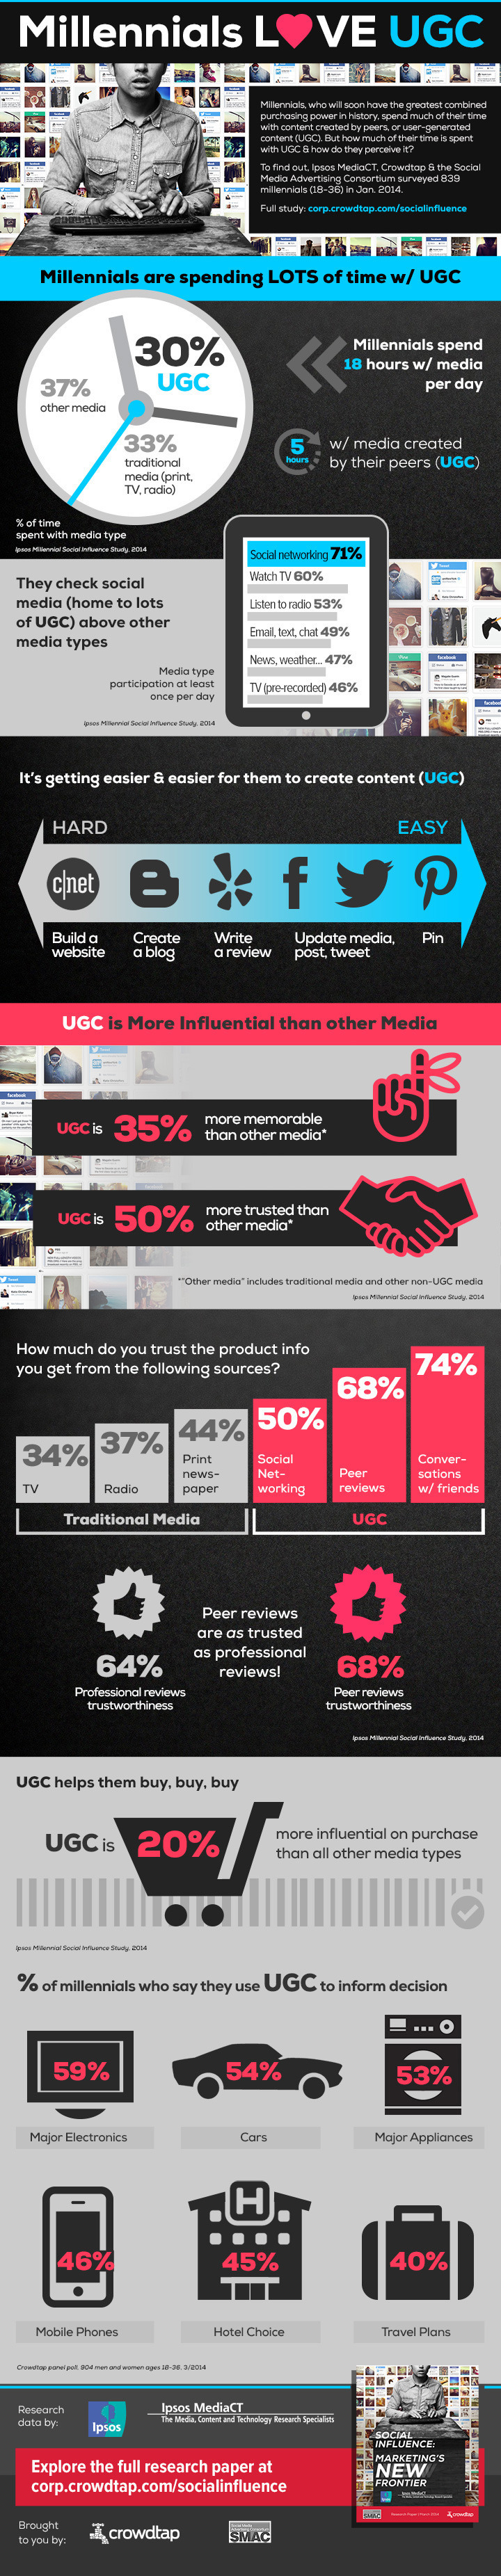 Millennials Love User-Generated Content Infographic